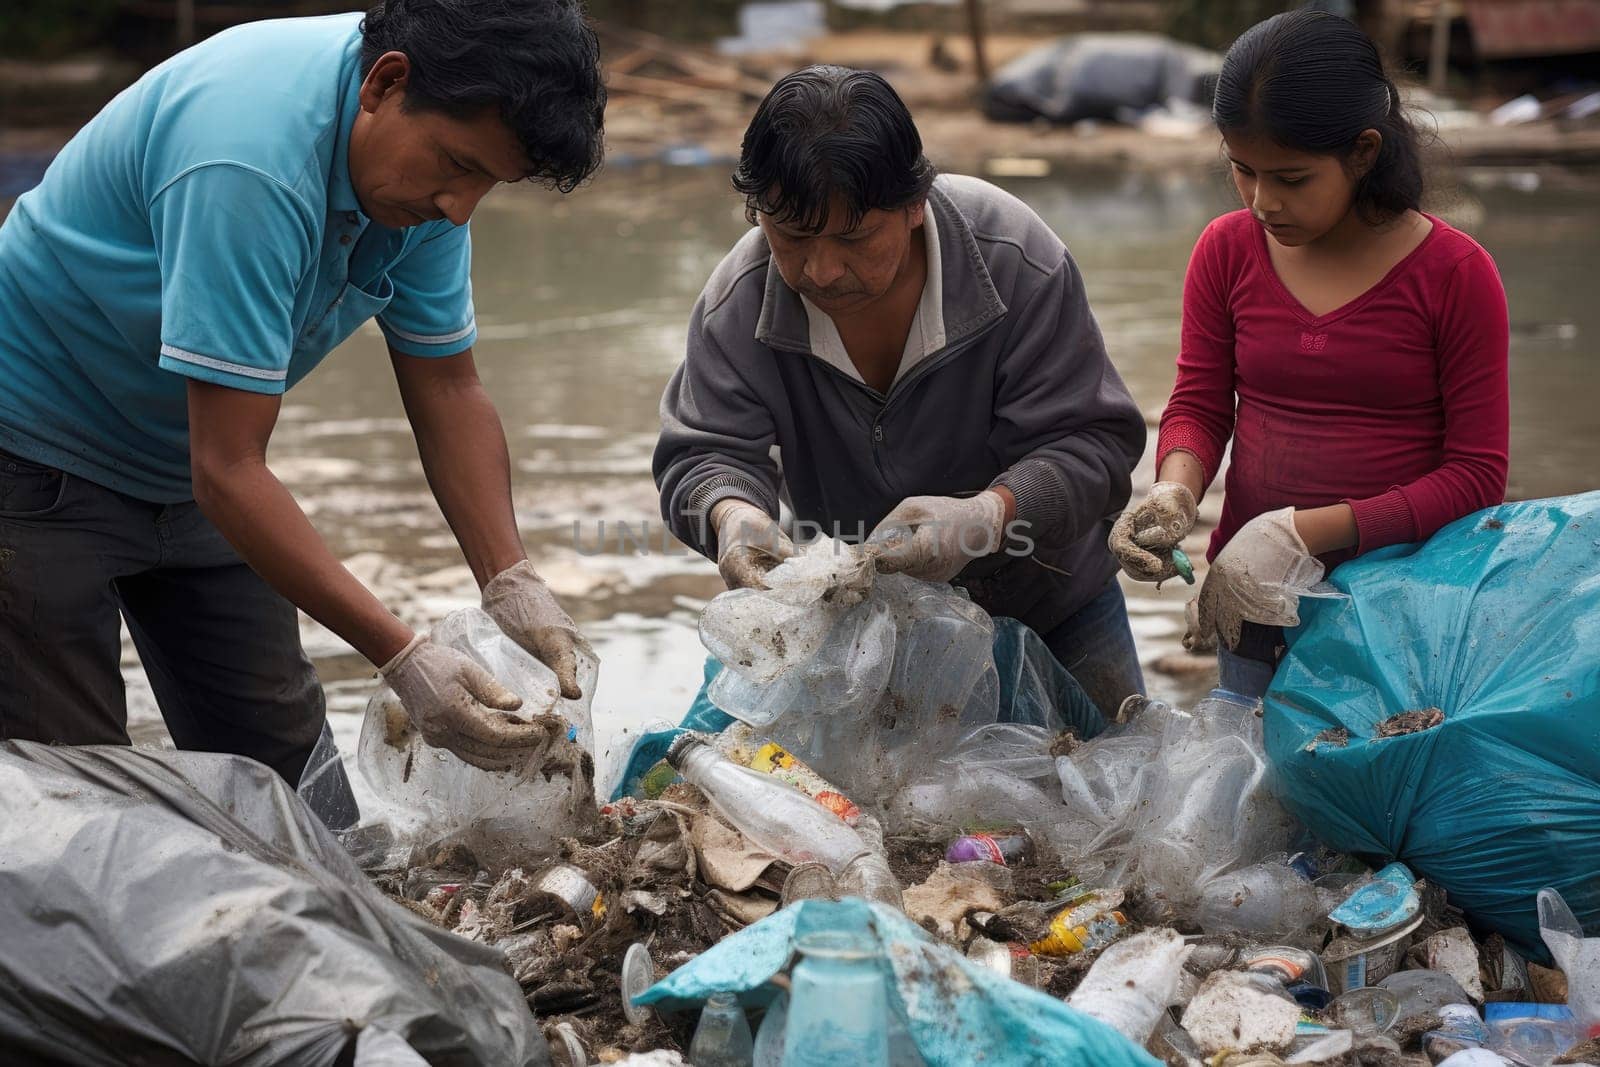 People sorting garbage, paper and organics for recycling by Yurich32